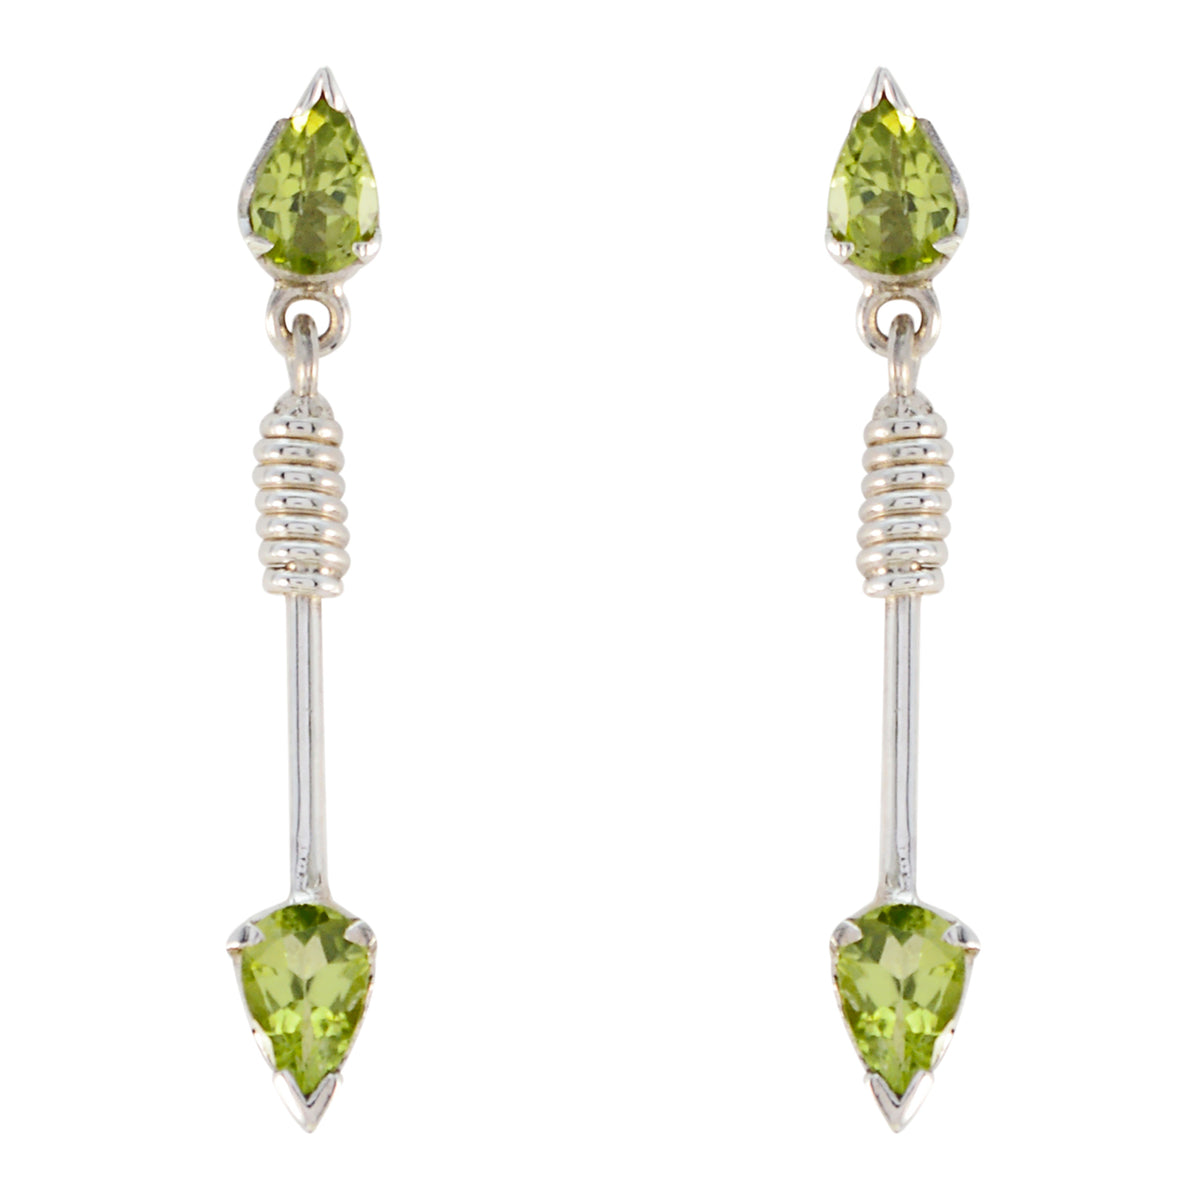 Riyo Nice Gemstone round Faceted Green Peridot Silver Earrings gift for b' day